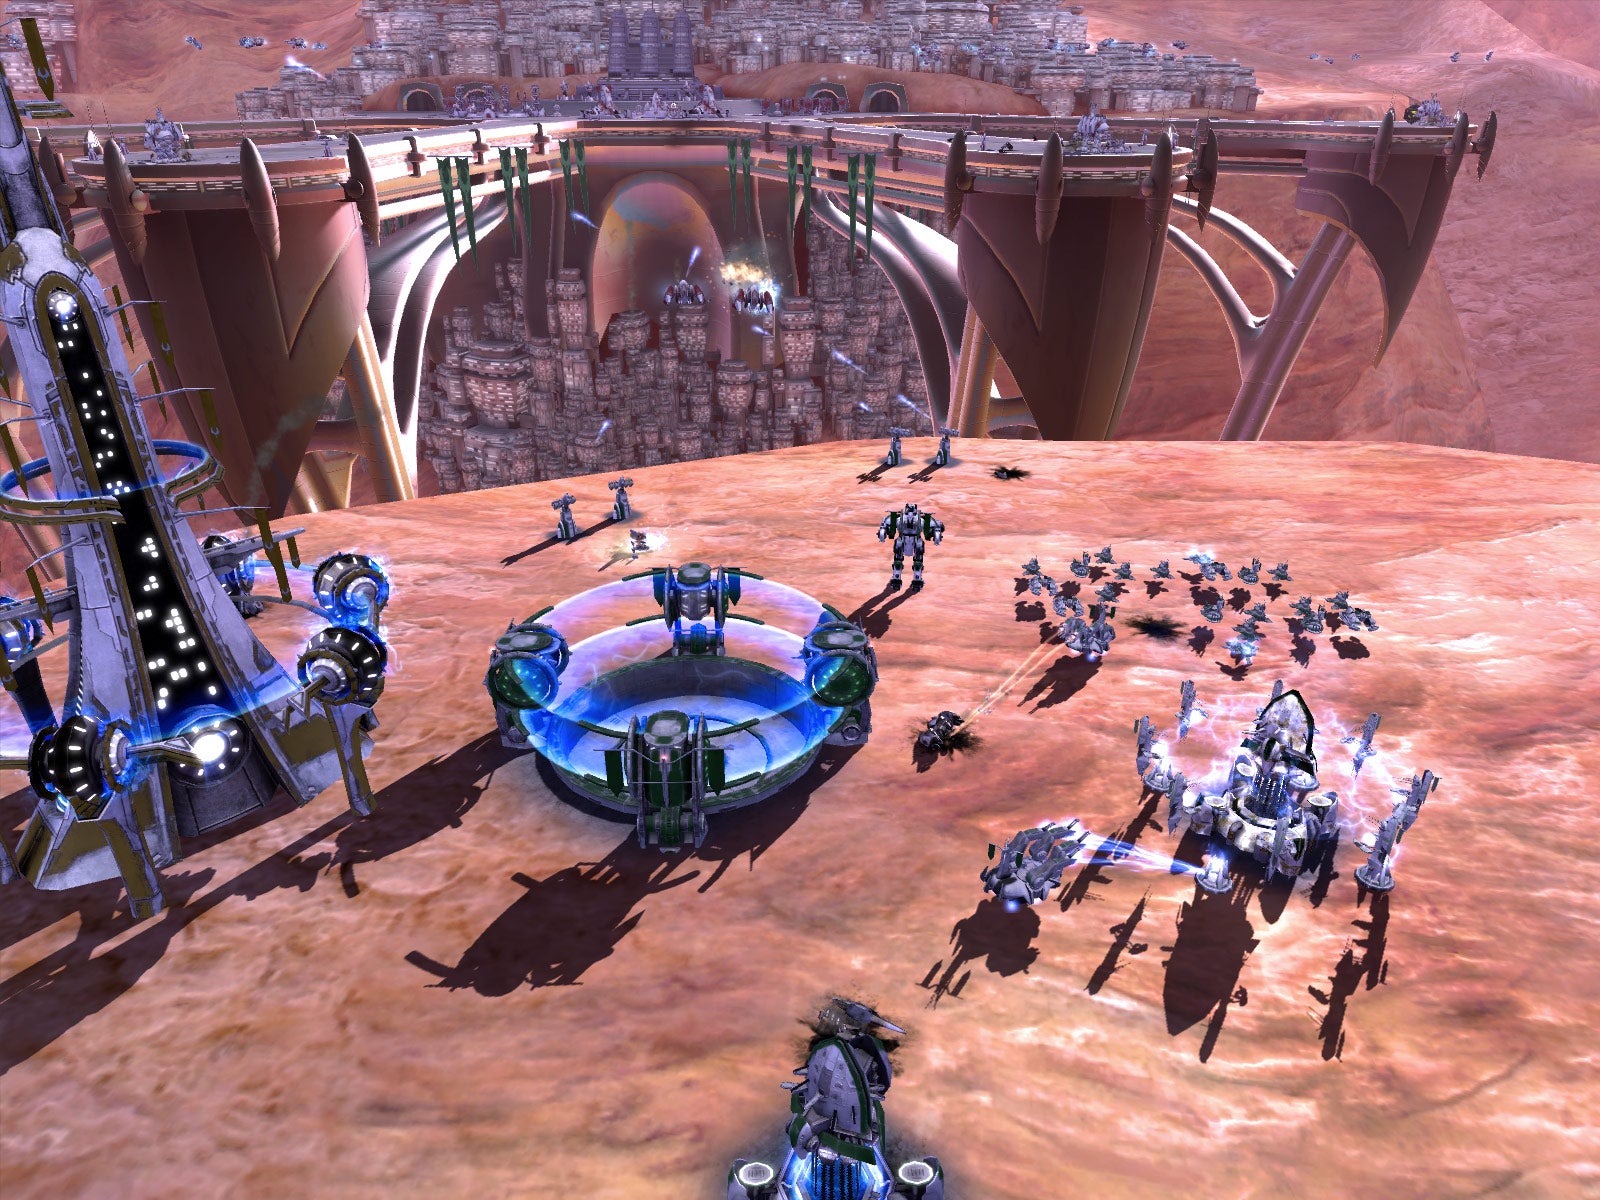 Robots gather to fight on a cliff in front of a large sci-fi city in Supreme Commander 2